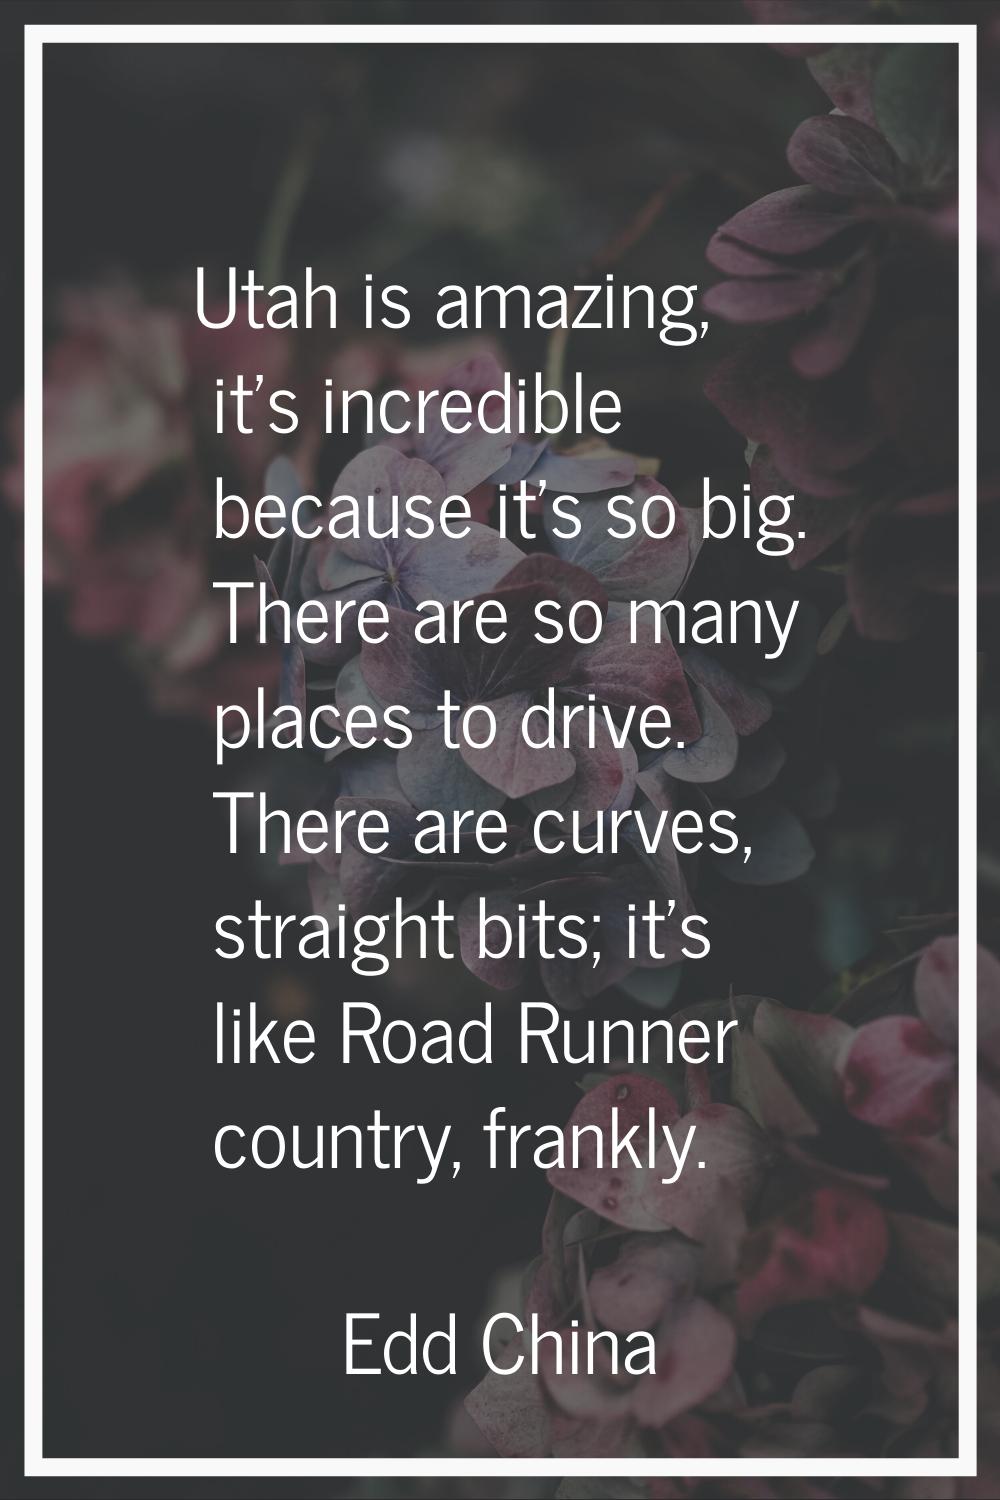 Utah is amazing, it's incredible because it's so big. There are so many places to drive. There are 